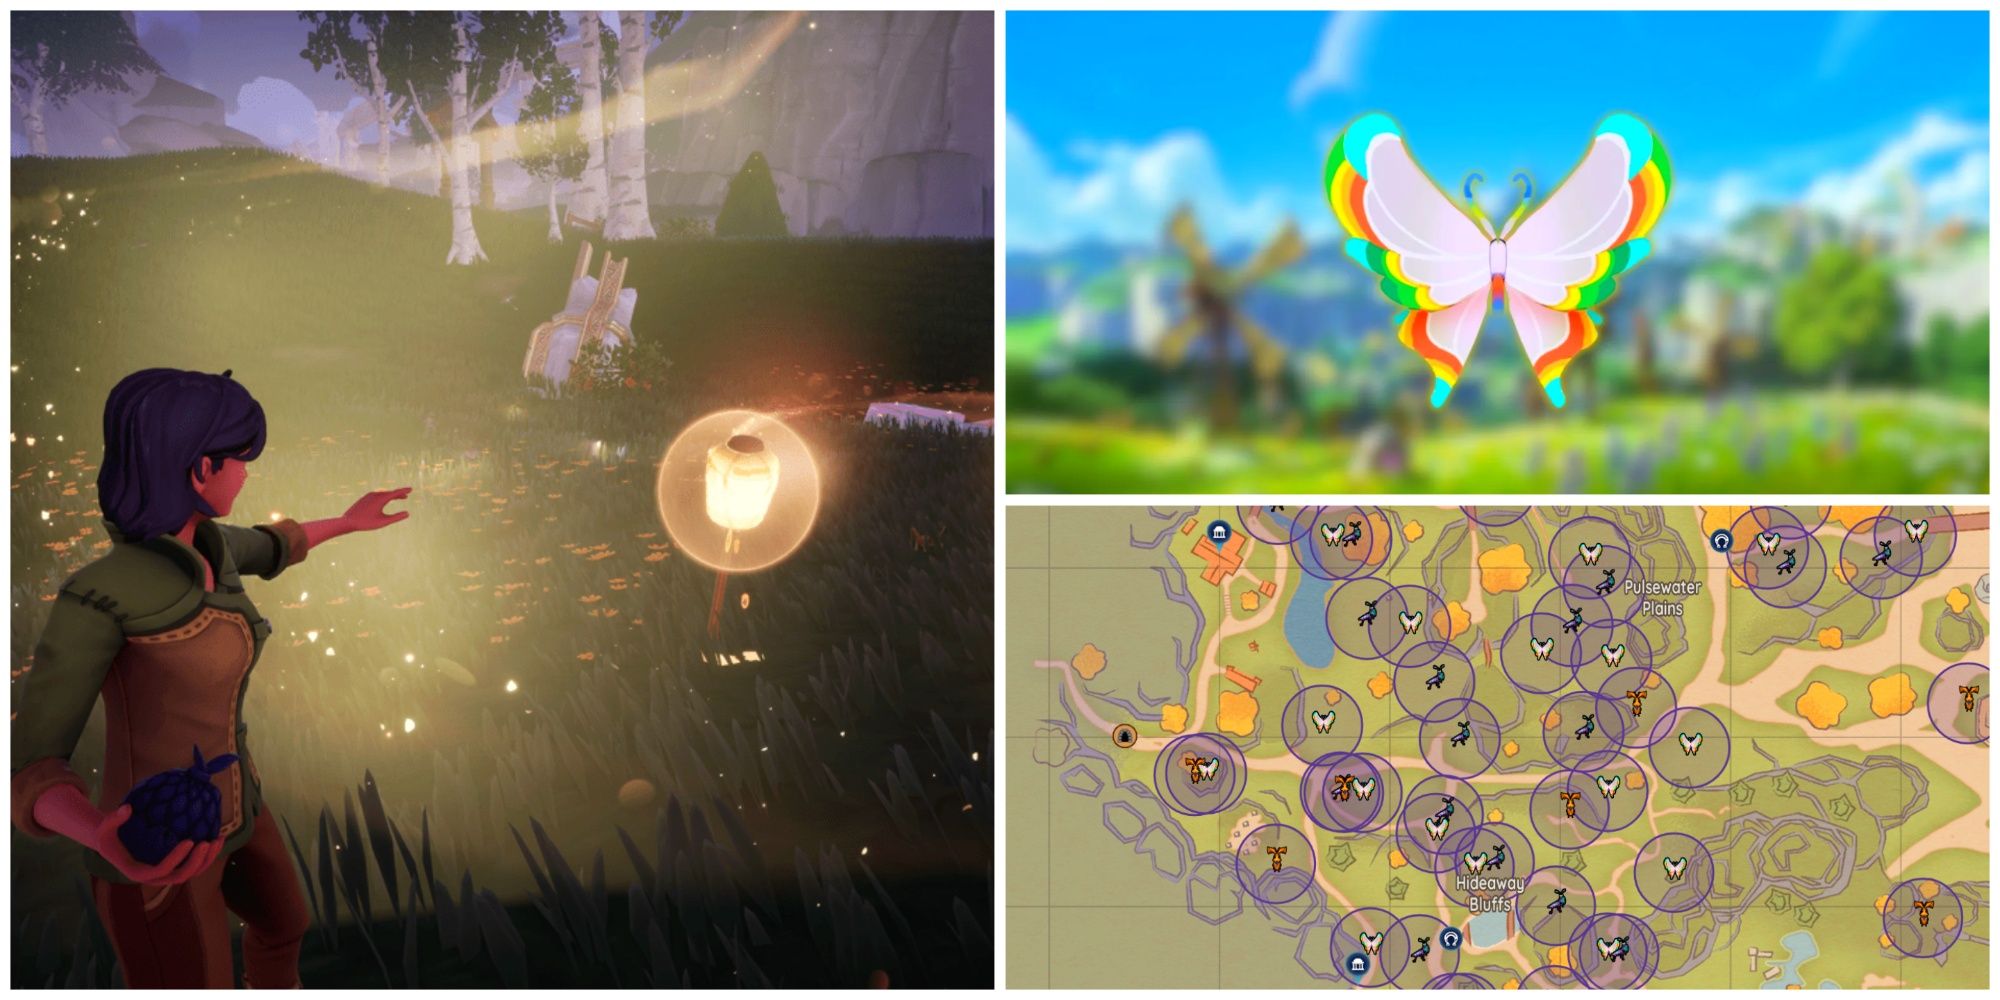 A split image of a Palia character placing a Honey Lure, a Rainbow-Tipped Butterfly, and the in-game Palia map